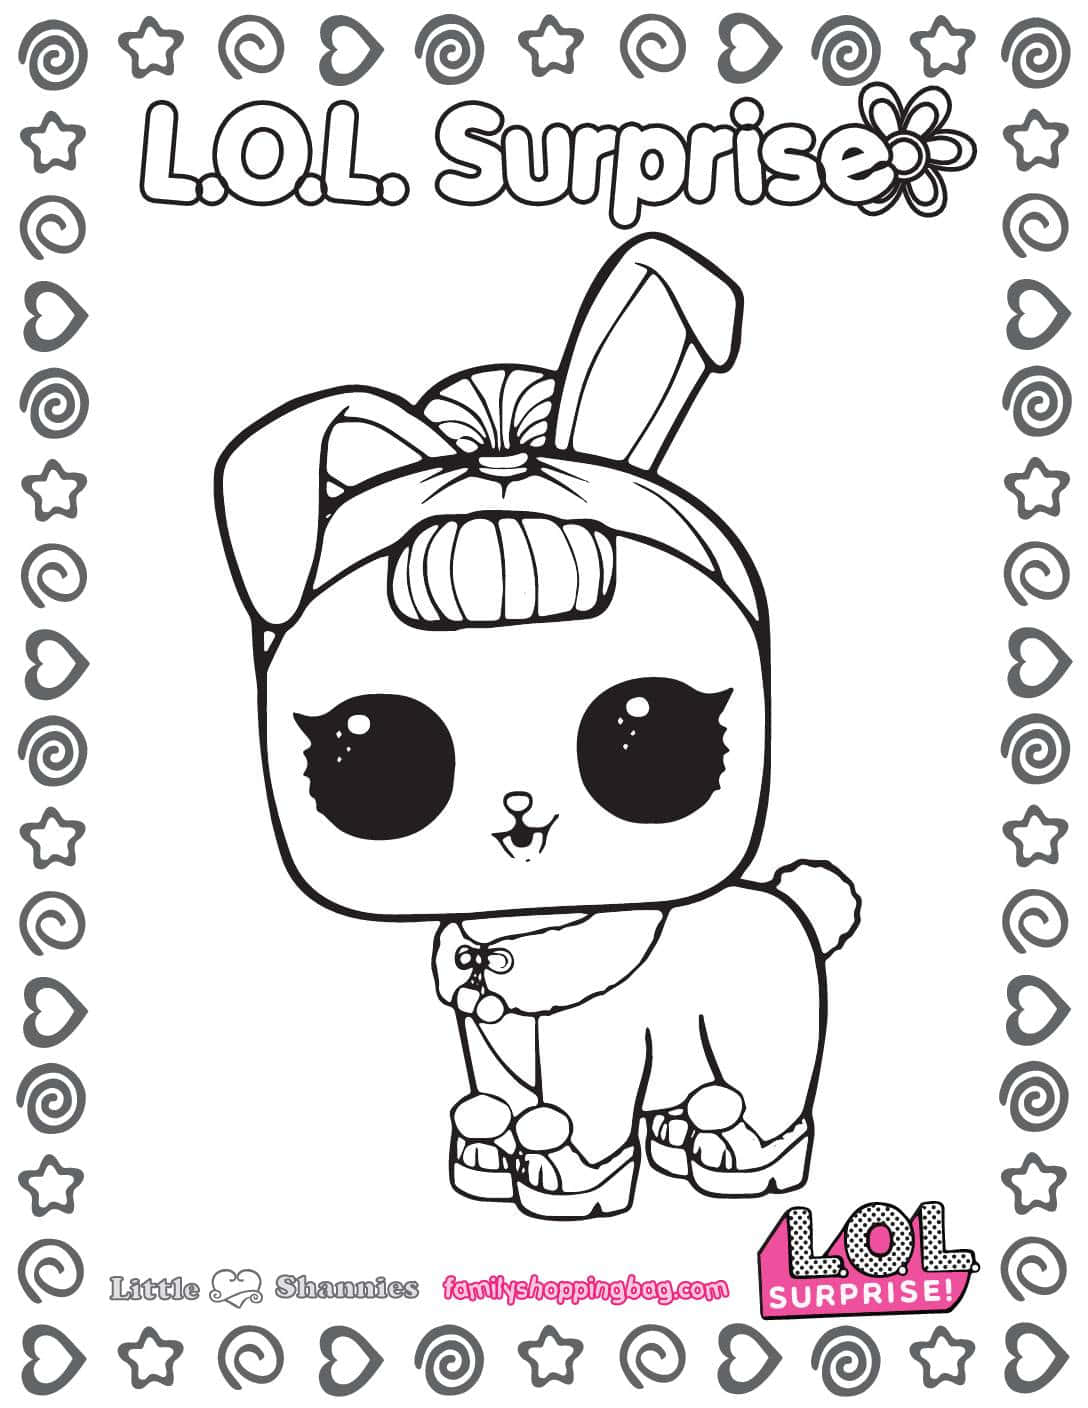 Bunny Lol Surprise Doll Coloring Picture